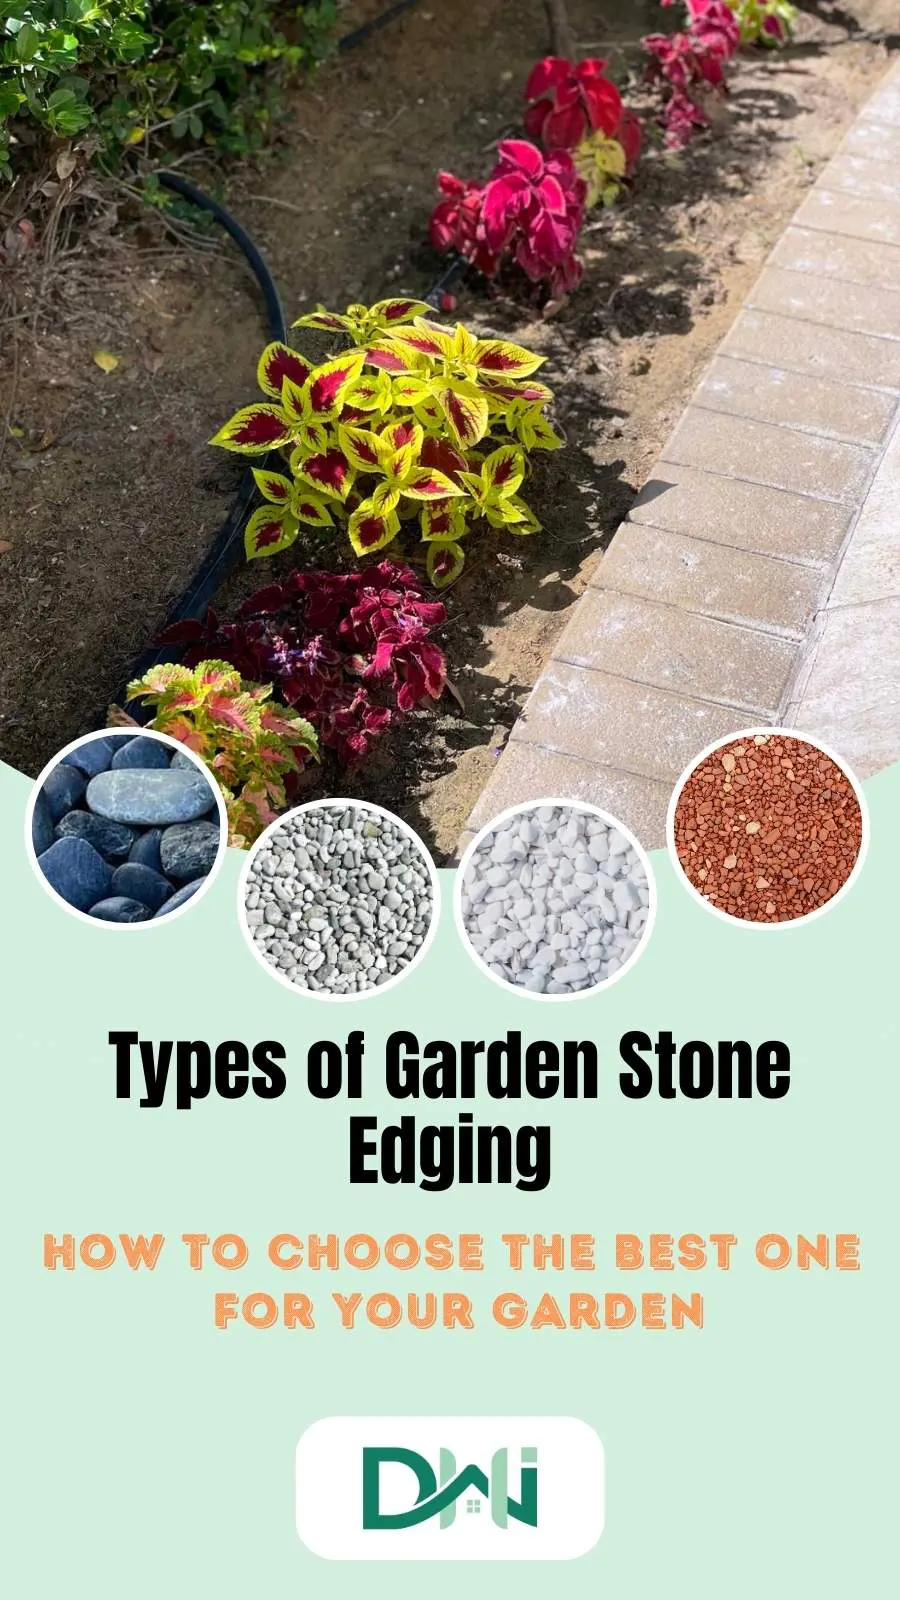 Garden stone edging can add a touch of elegance and definition to your outdoor space. Learn about the benefits, types, and installation tips for this popular landscaping technique.